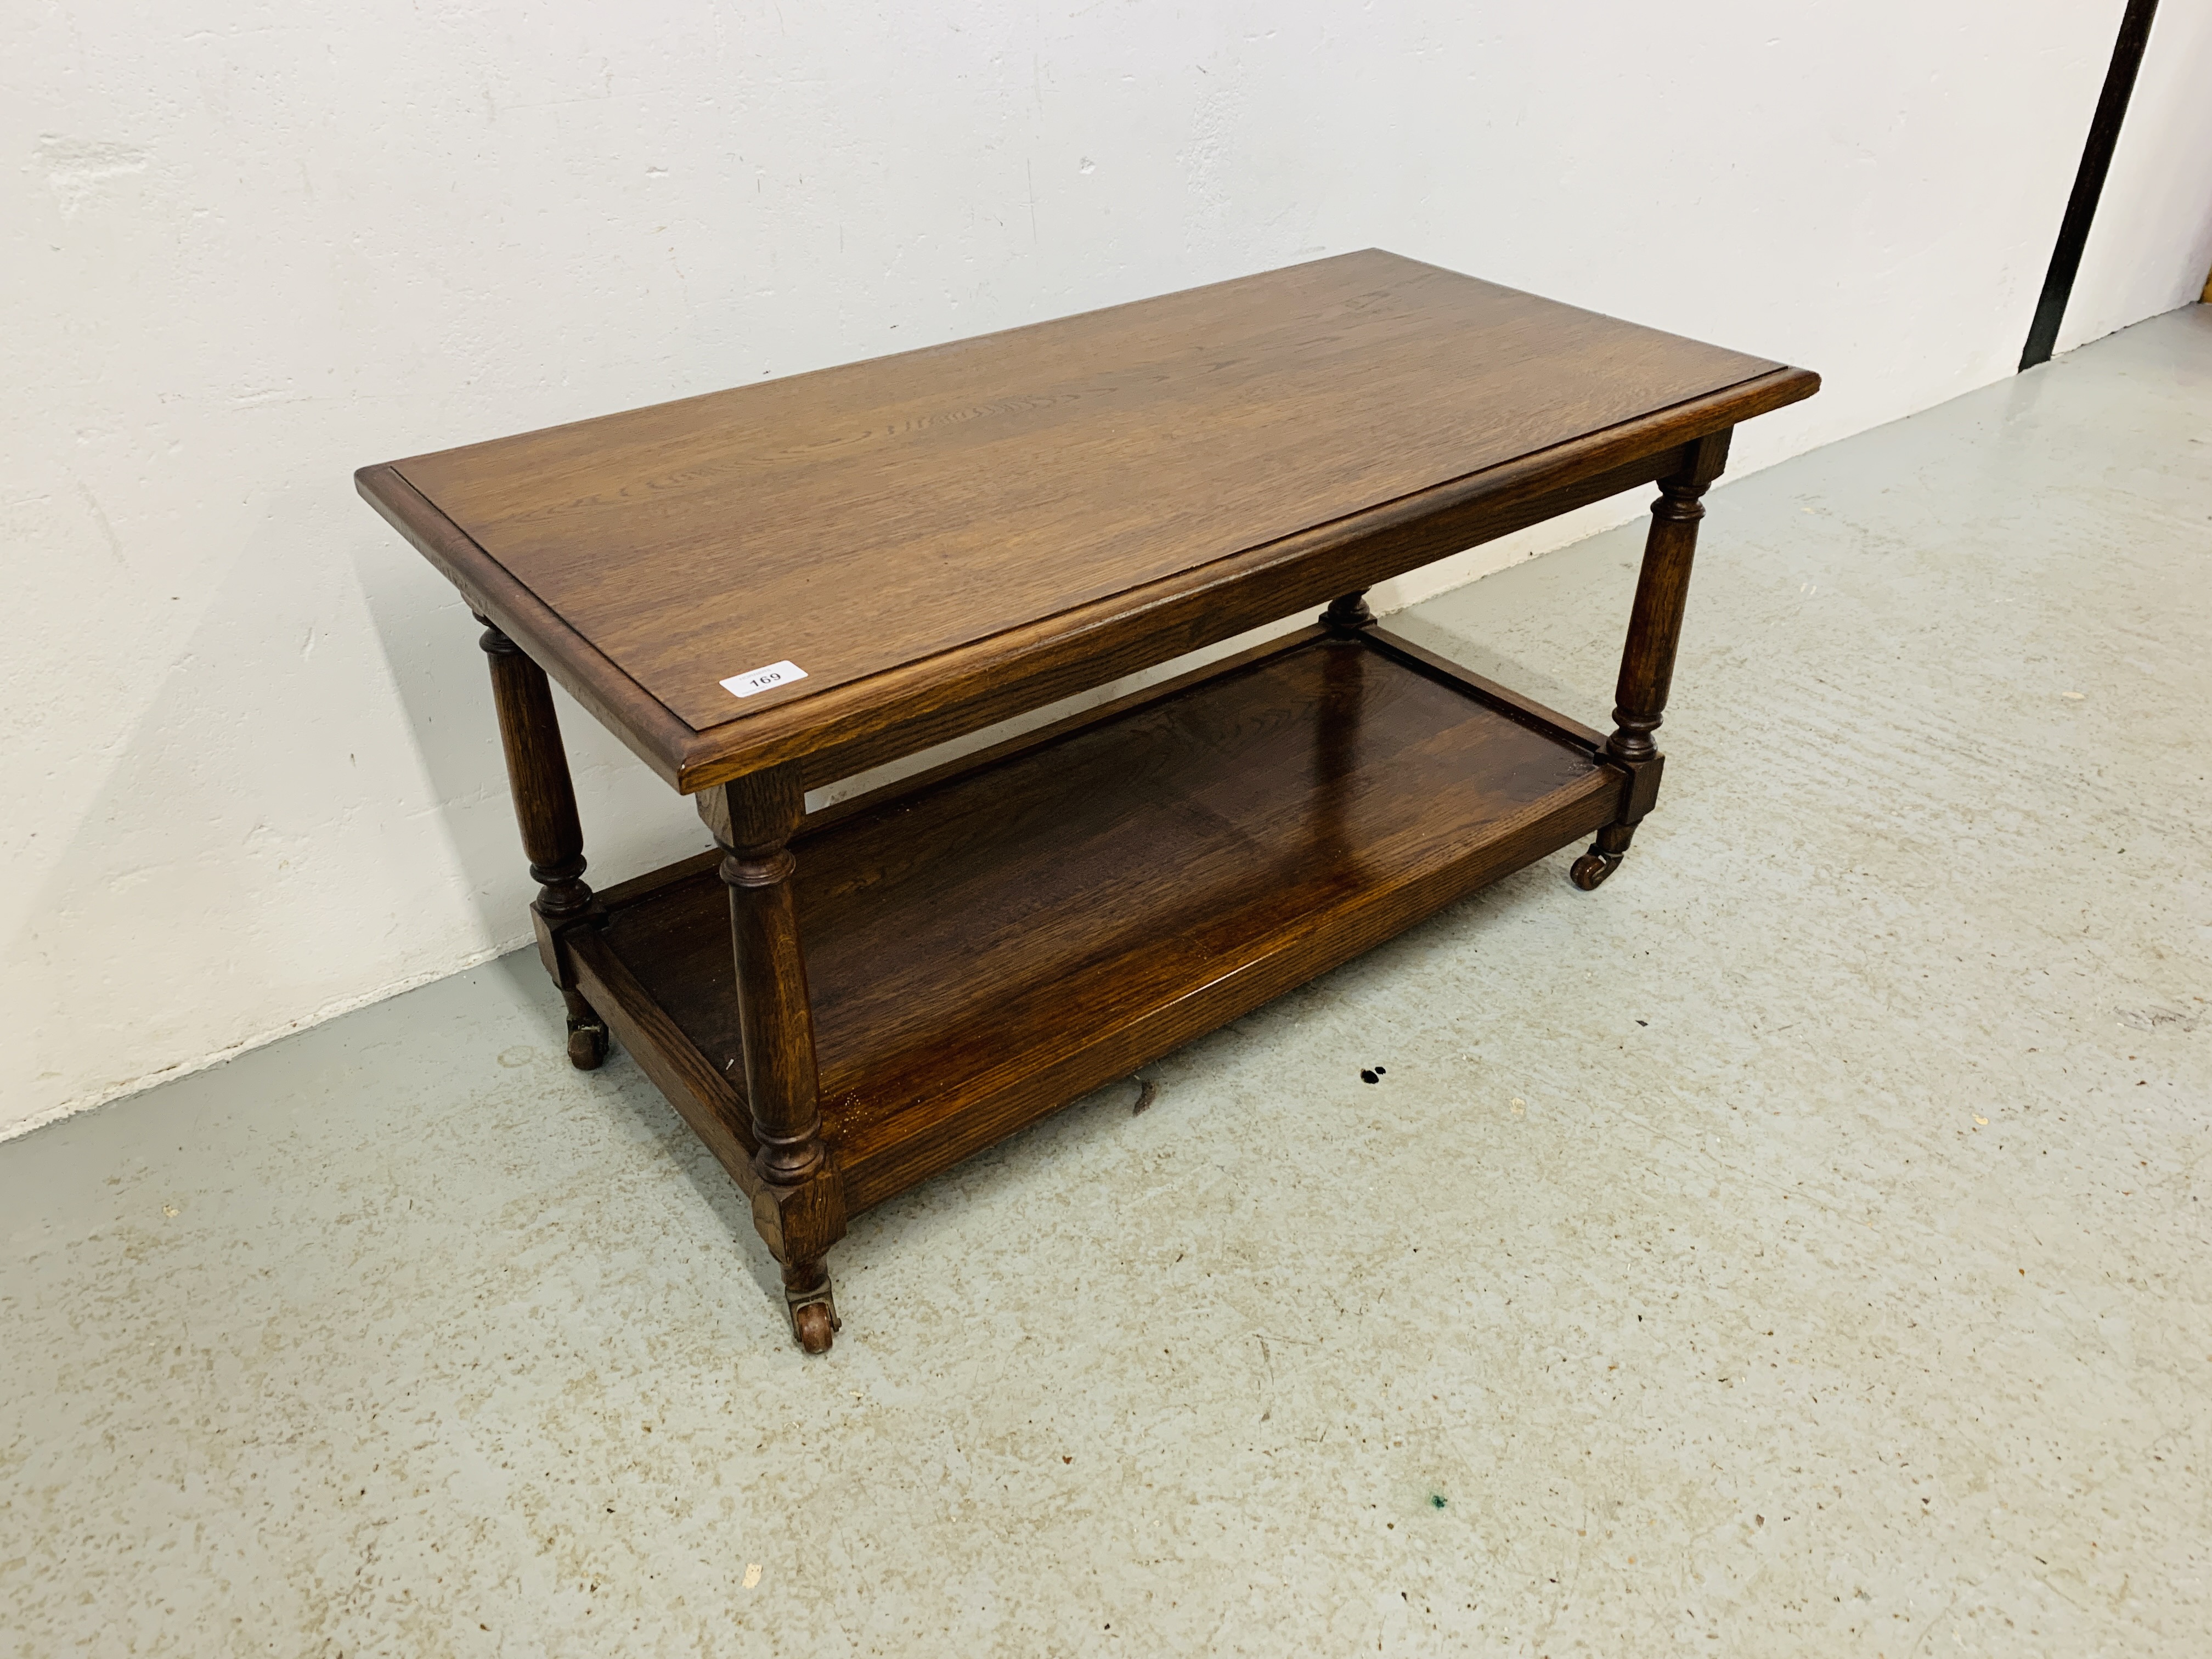 A GOOD QUALITY SOLID OAK TWO TIER COFFEE TABLE - W 92CM. D 46CM. H 47CM. - Image 3 of 7